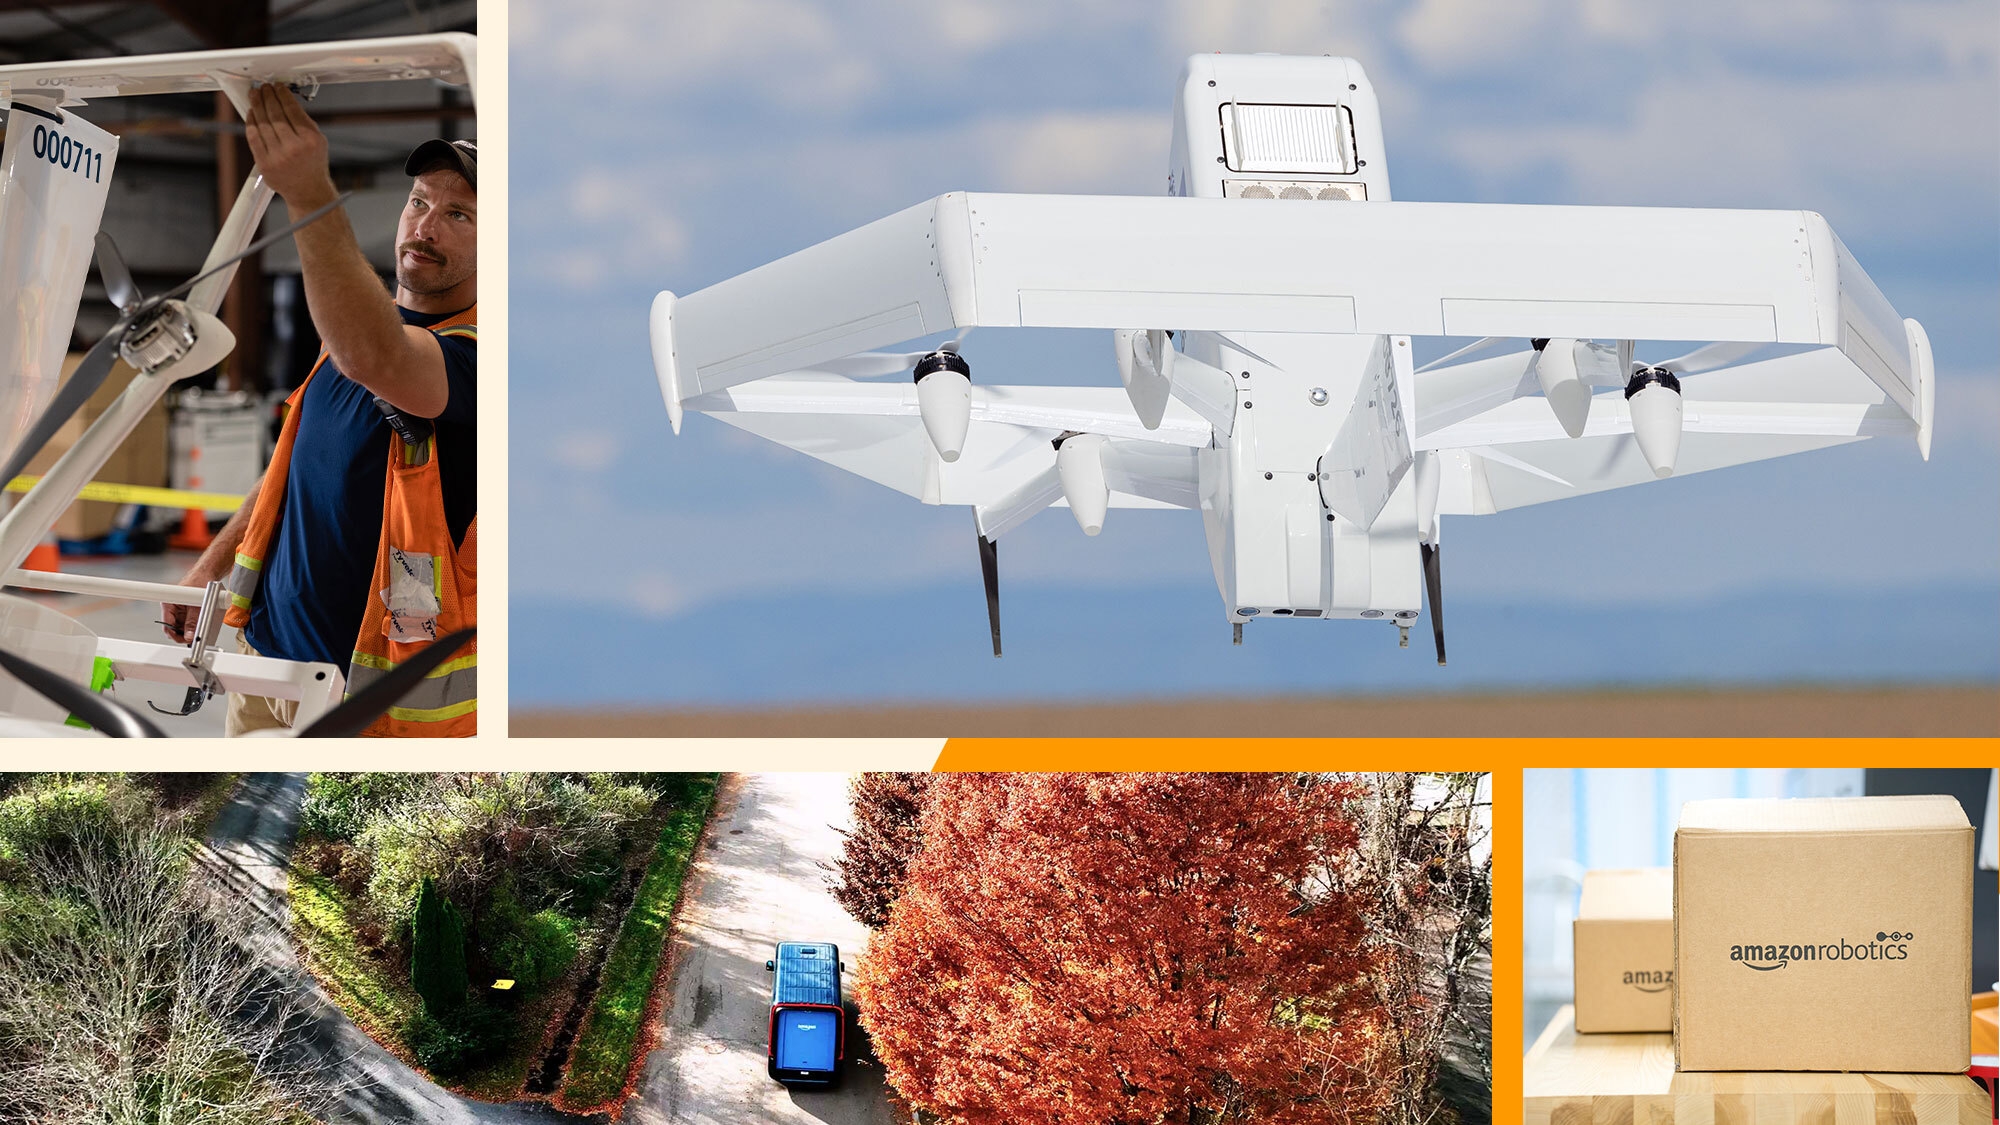 A collage of four images. The top left shows a man working on a drone, and next to it is the drone flying. the bottoms shows a Rivian delivery van and an Amazon Robotics box on the right bottom corner. 